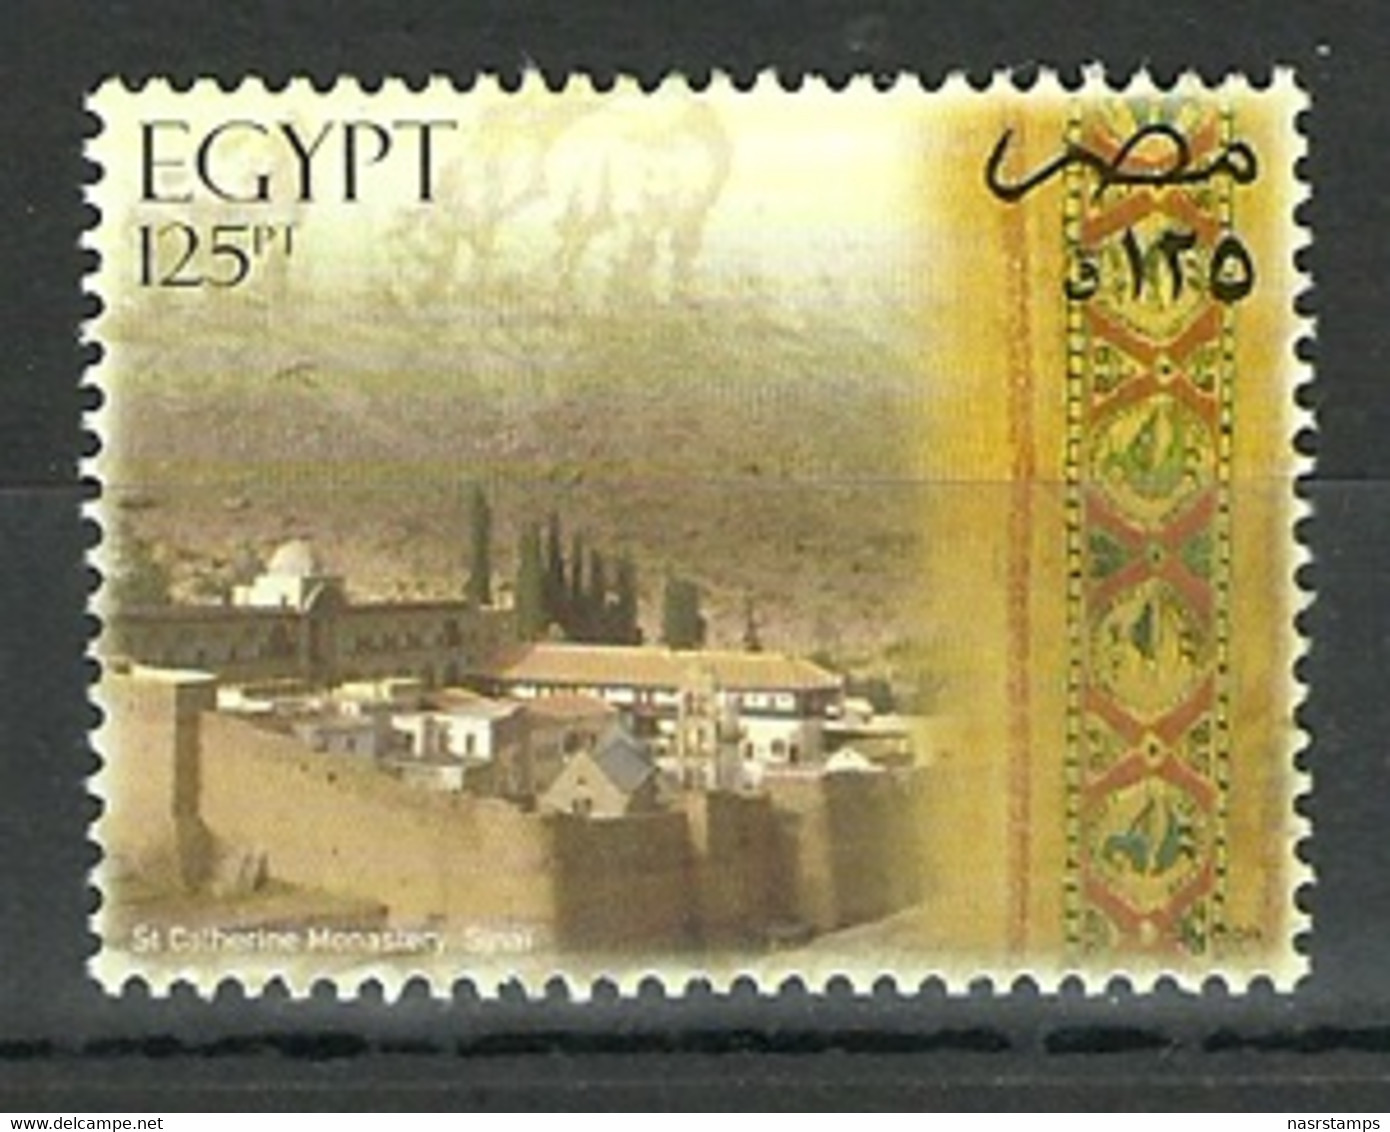 Egypt - 2004 - ( Treasures of Egypt Booklet ) - Pharaohs - C.V. 50 US$ -- 22 Pages Include The Gold Stamps